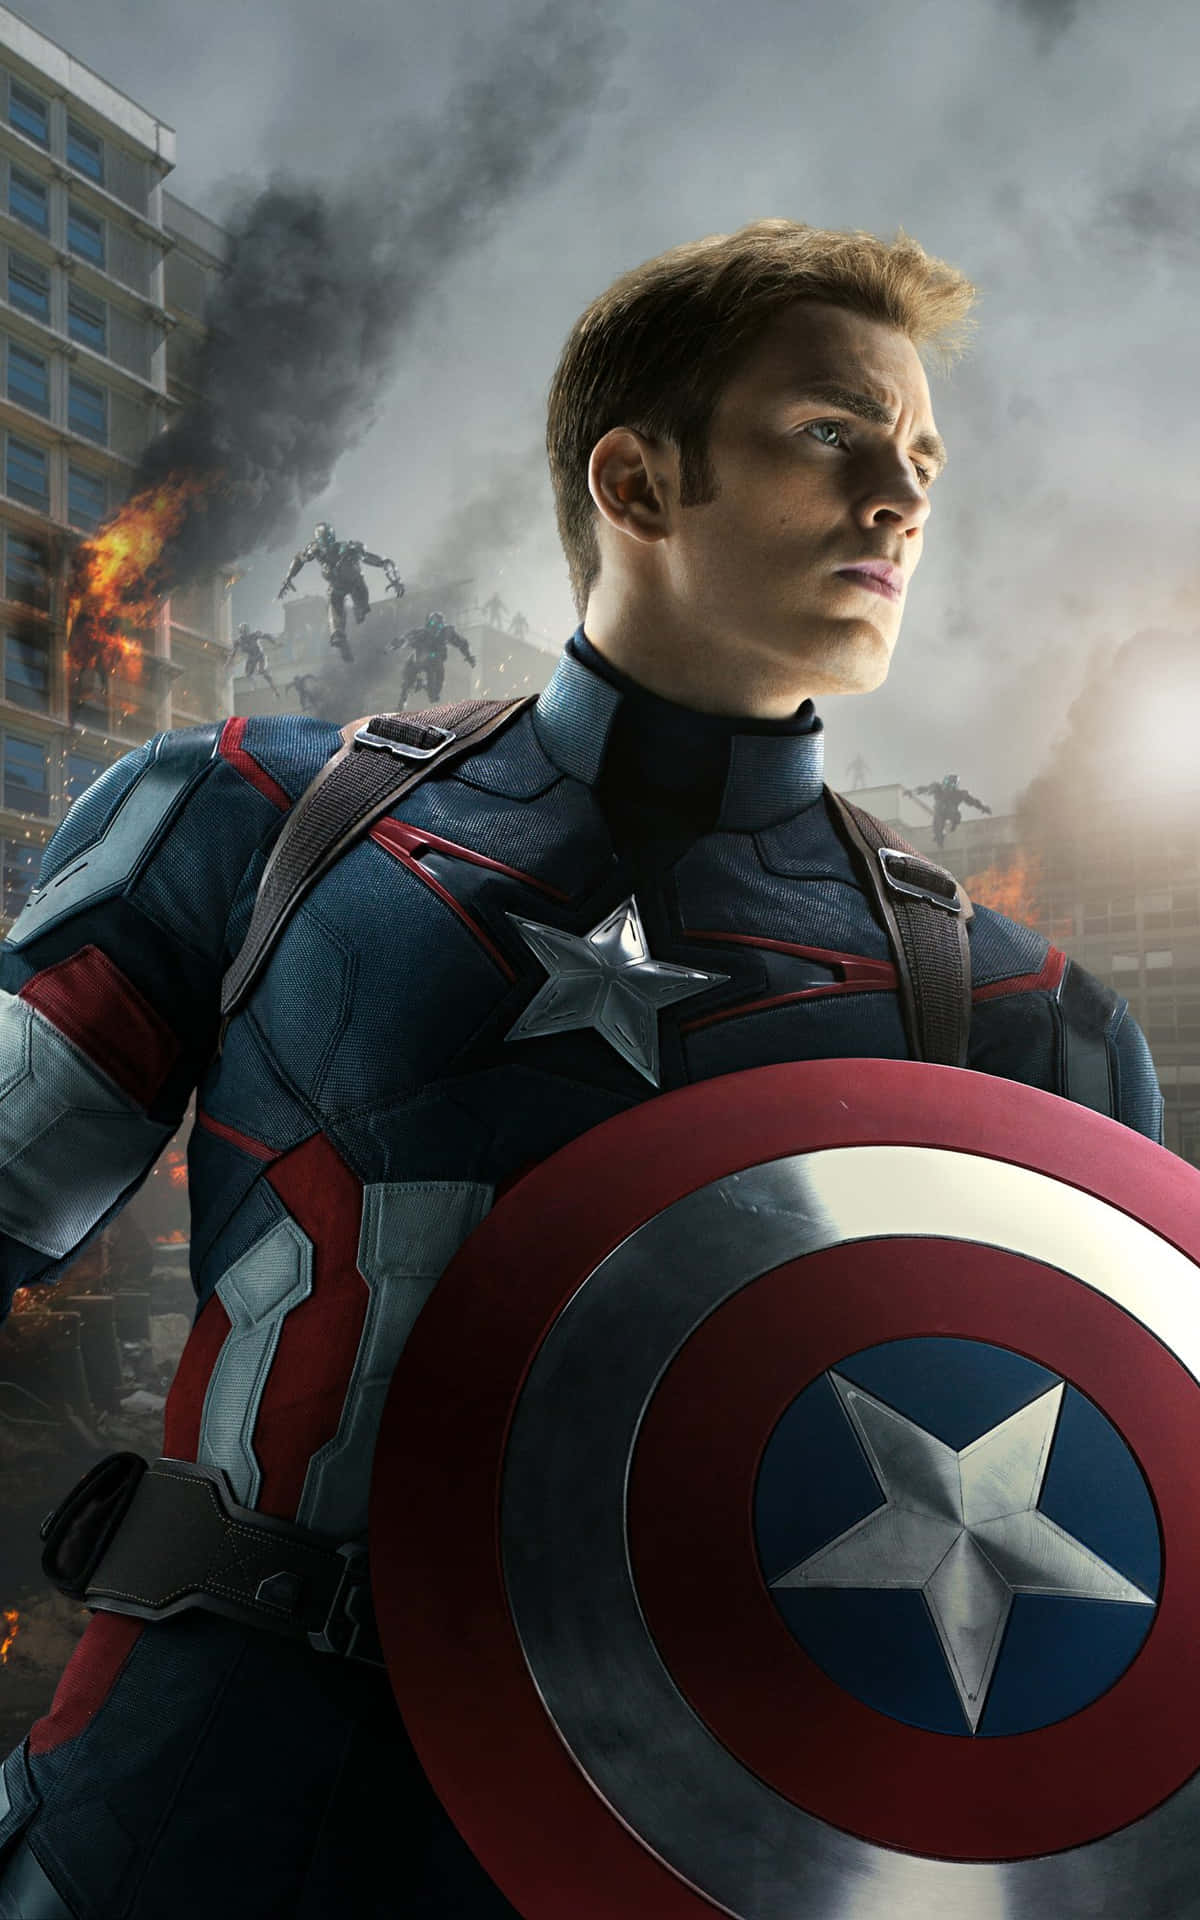 Captain America stands staunch on Android